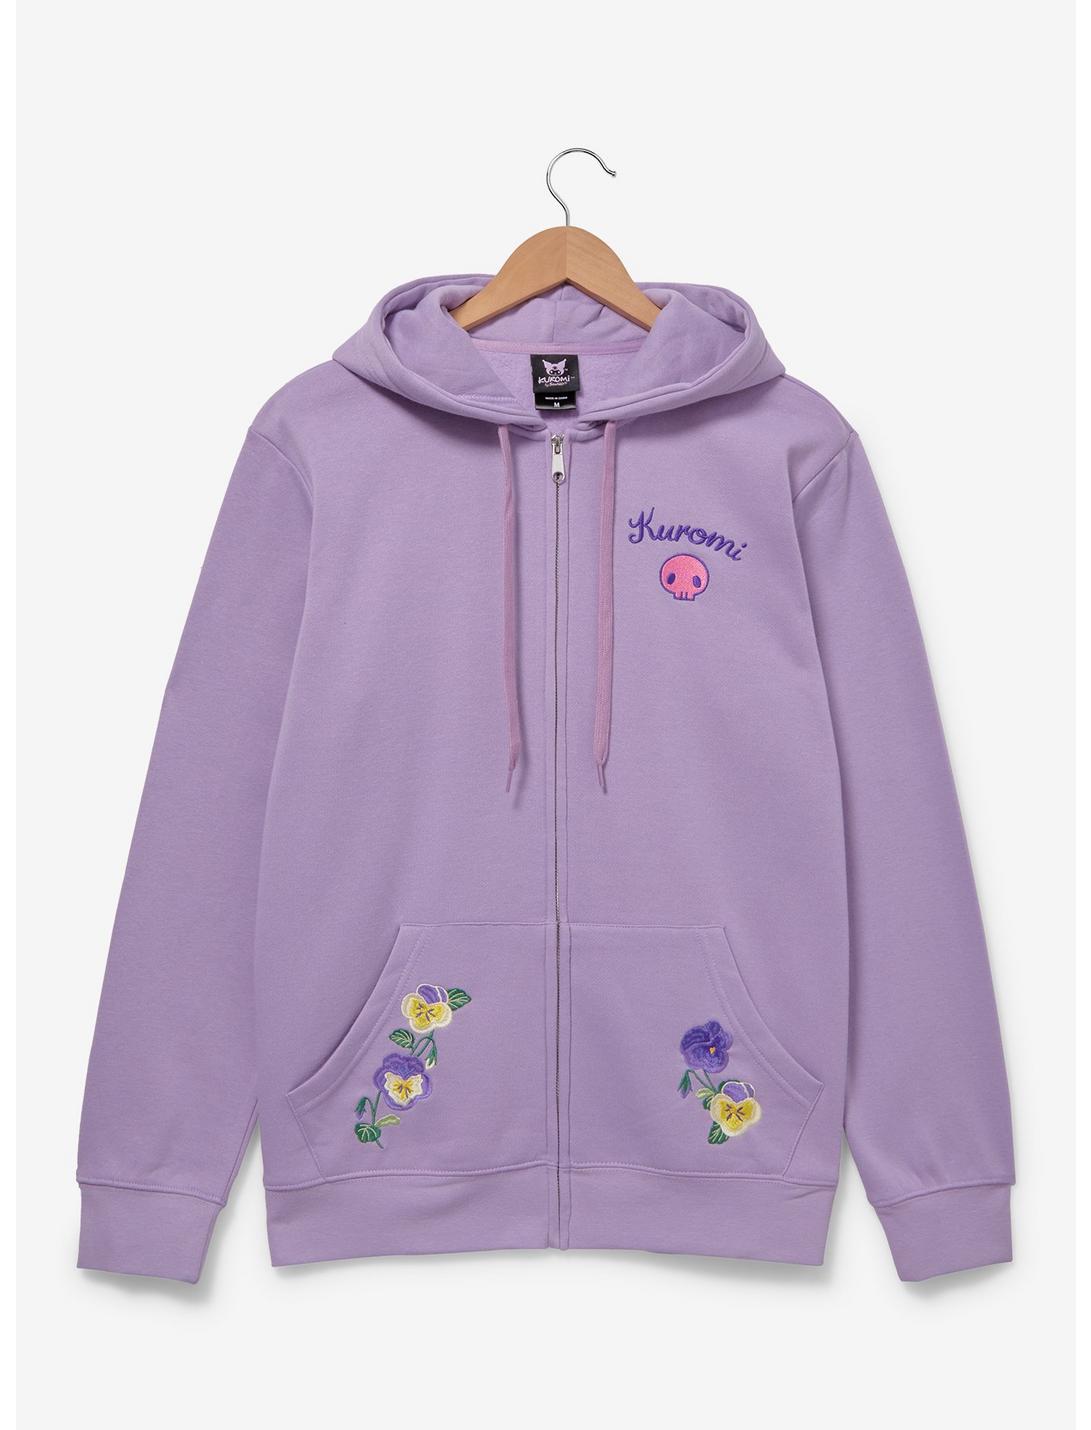 Sanrio Kuromi Floral Zippered Hoodie - BoxLunch Exclusive, LILAC, hi-res